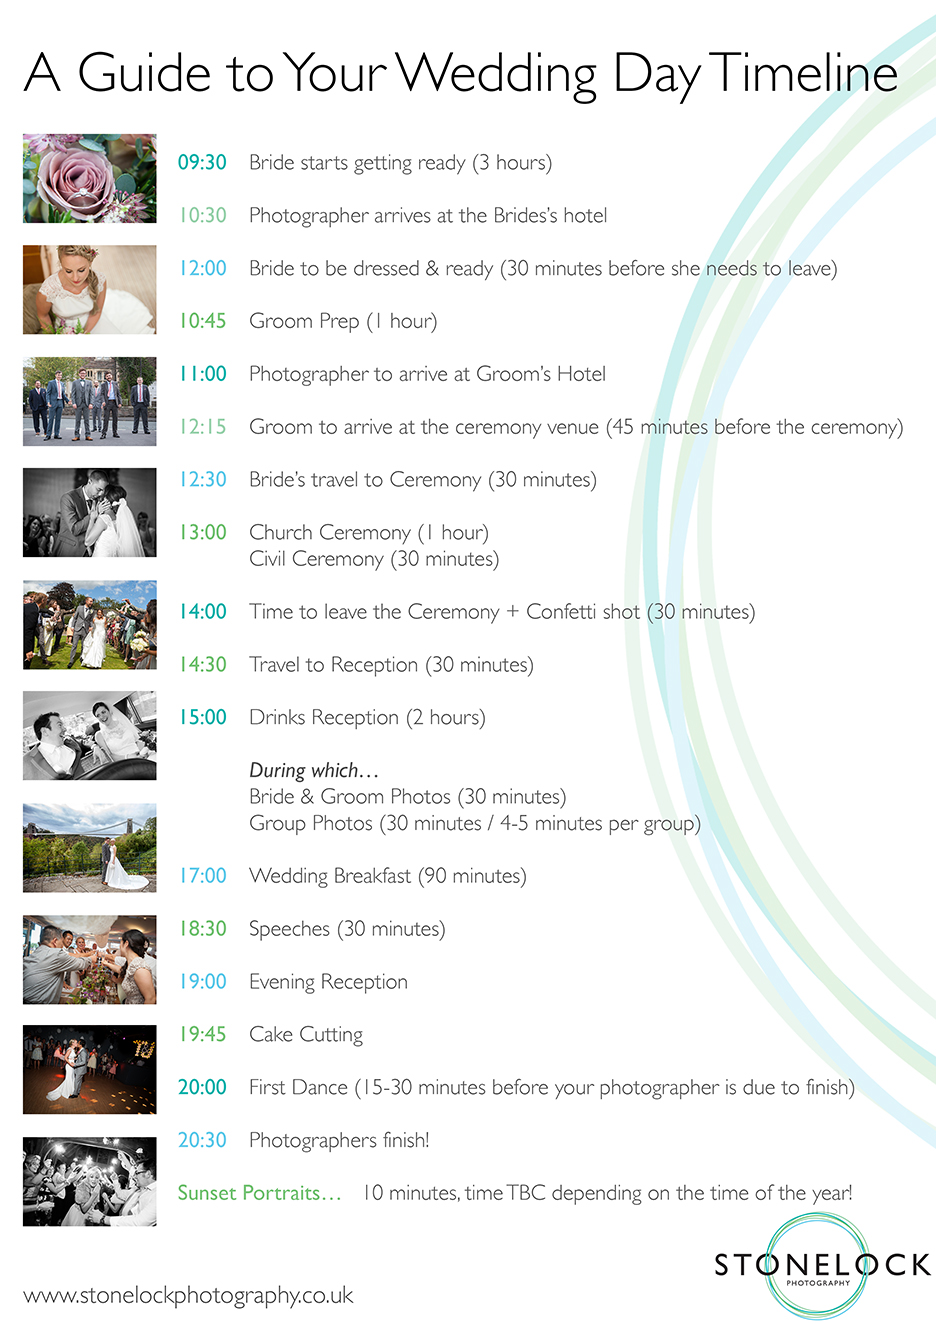 A Guide to your Wedding Day Timeline by Stonelock Photography